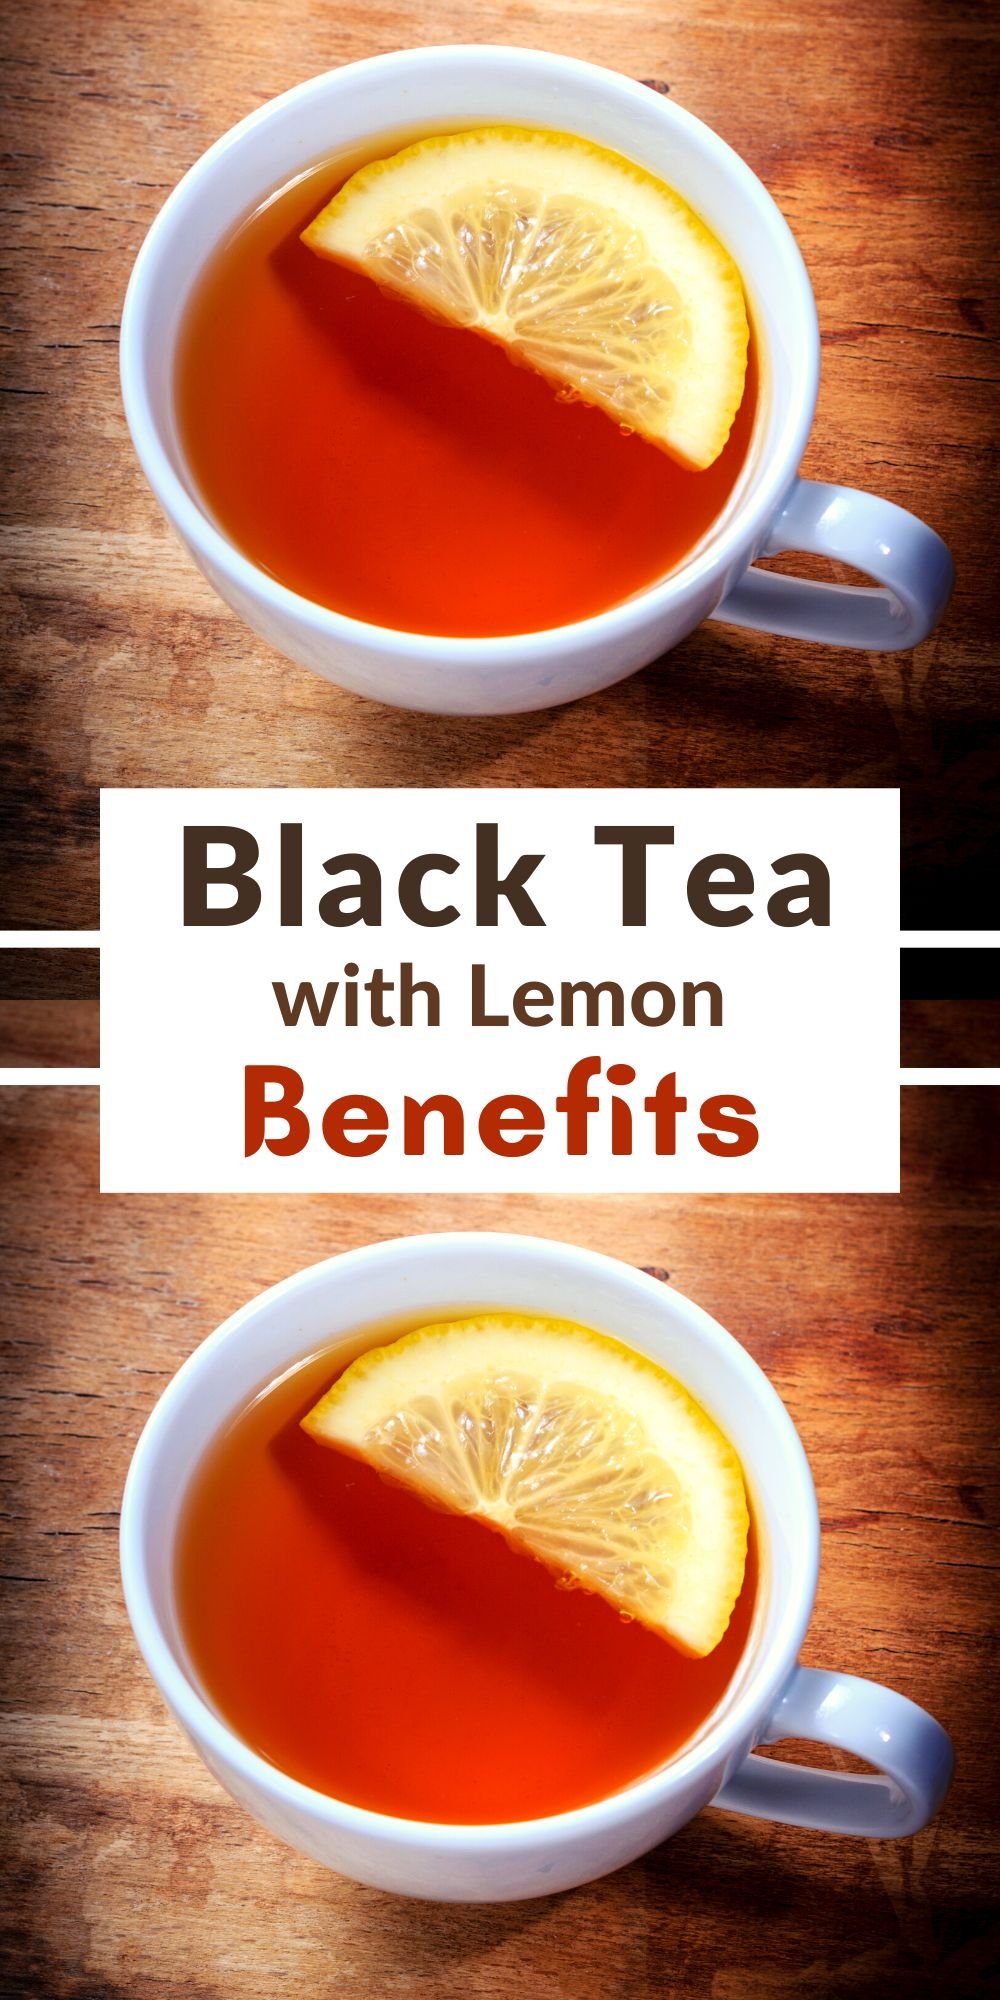 Black Tea with Lemon Benefits - Here's Why This Combo Rocks!